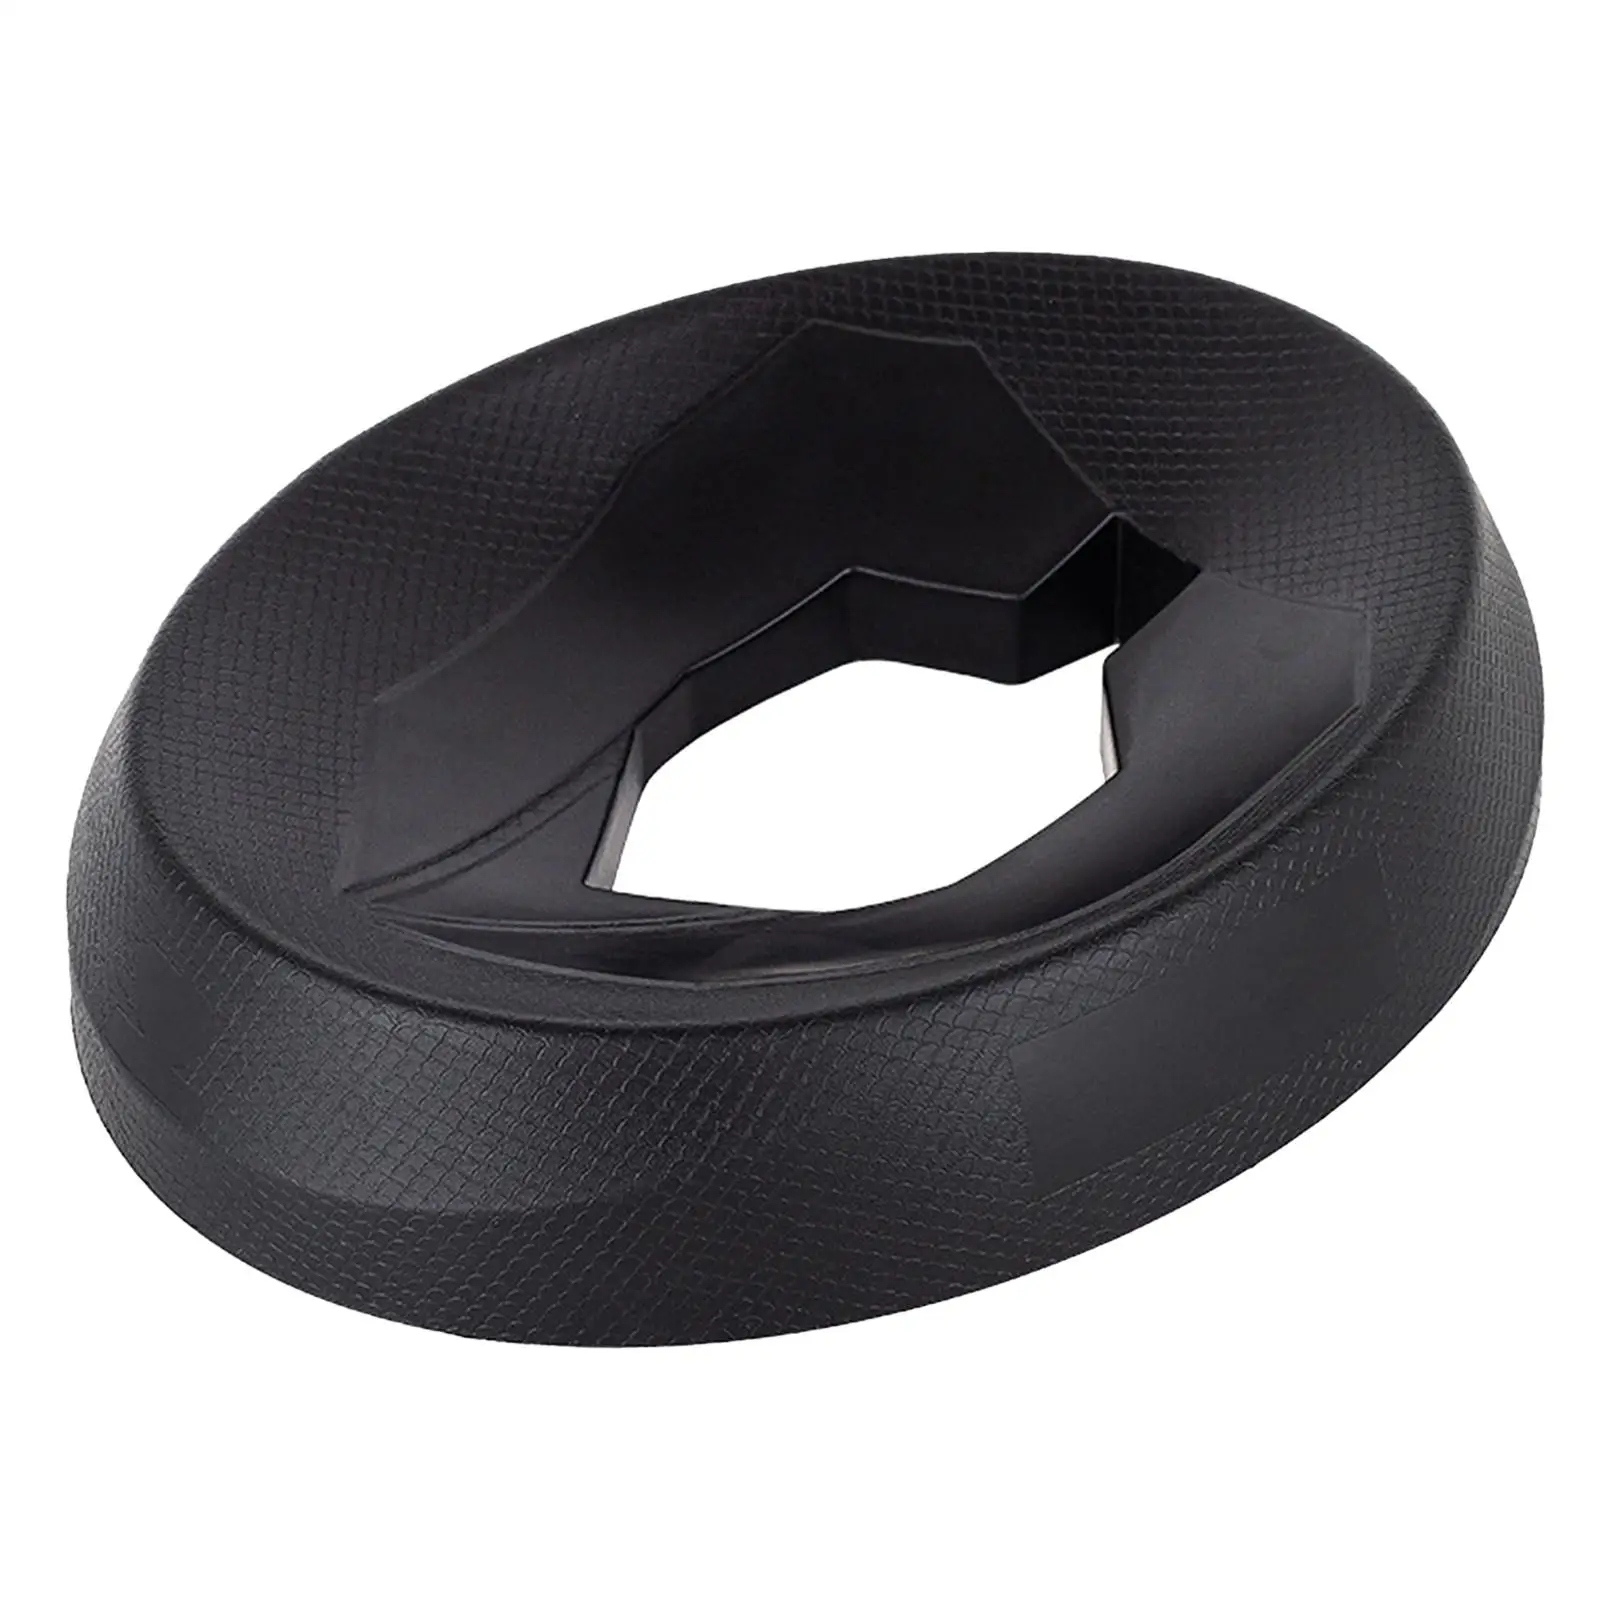 Helmet Support Pad Portable Nonslip Compact Ring Stand Donut Home Use Protection Pad Helmet Display Base for Motorcycle